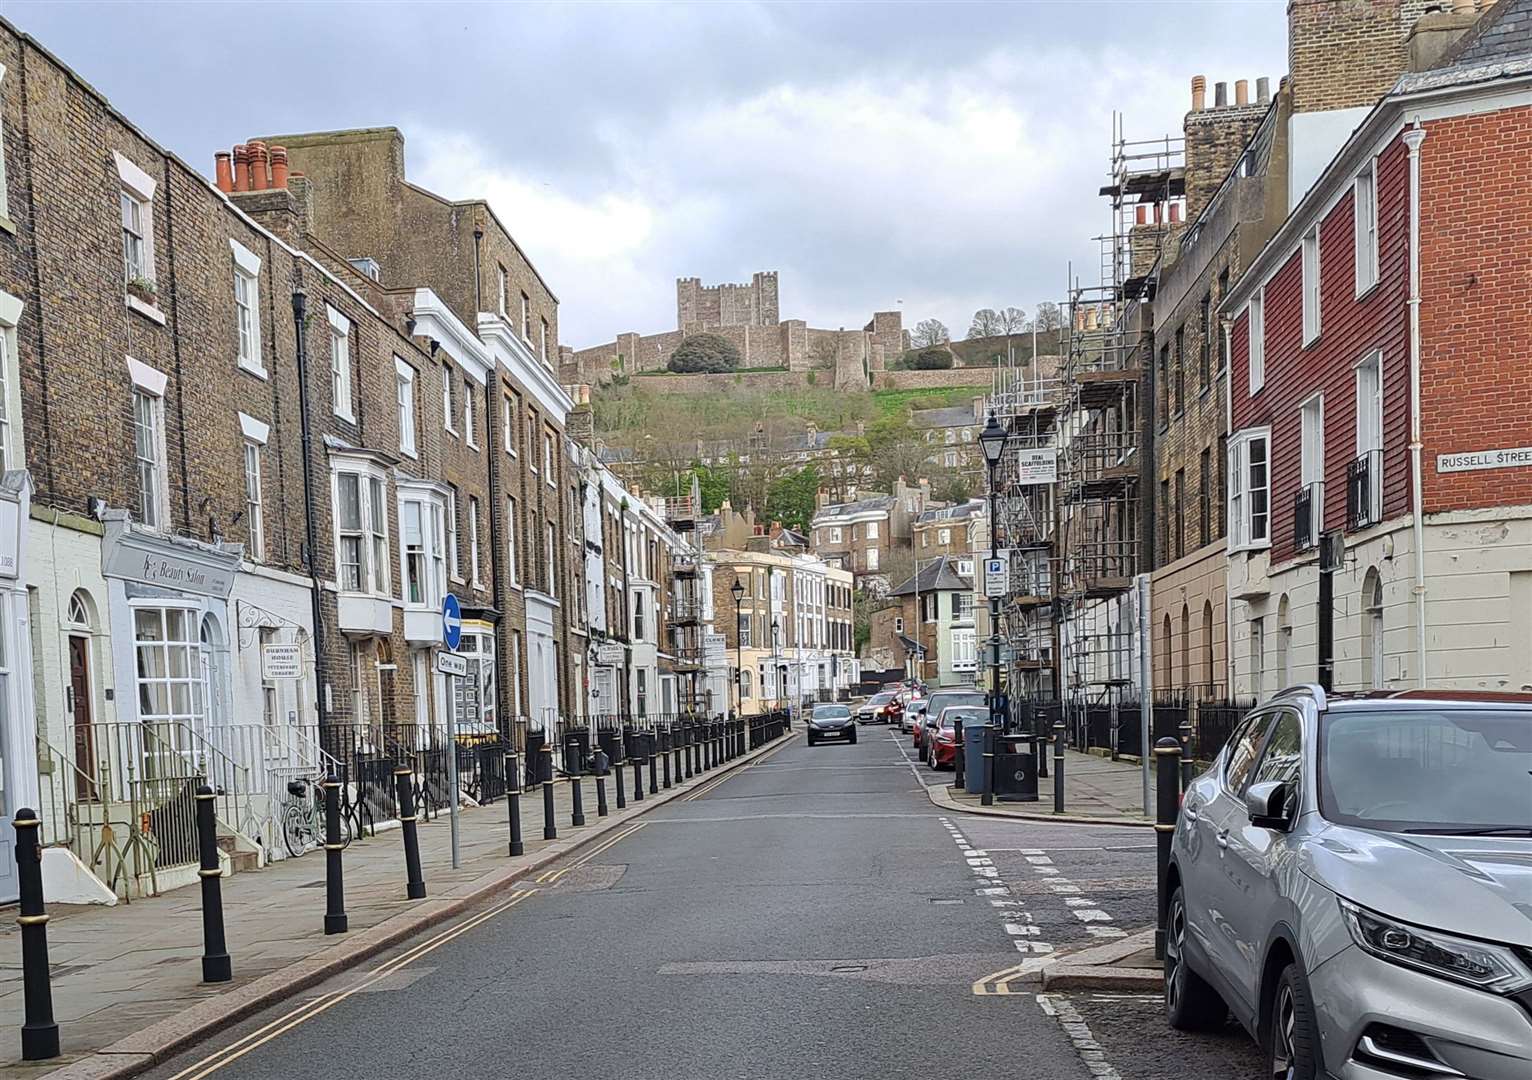 Castle Street with a clear view of Dover Castle on the hilltop